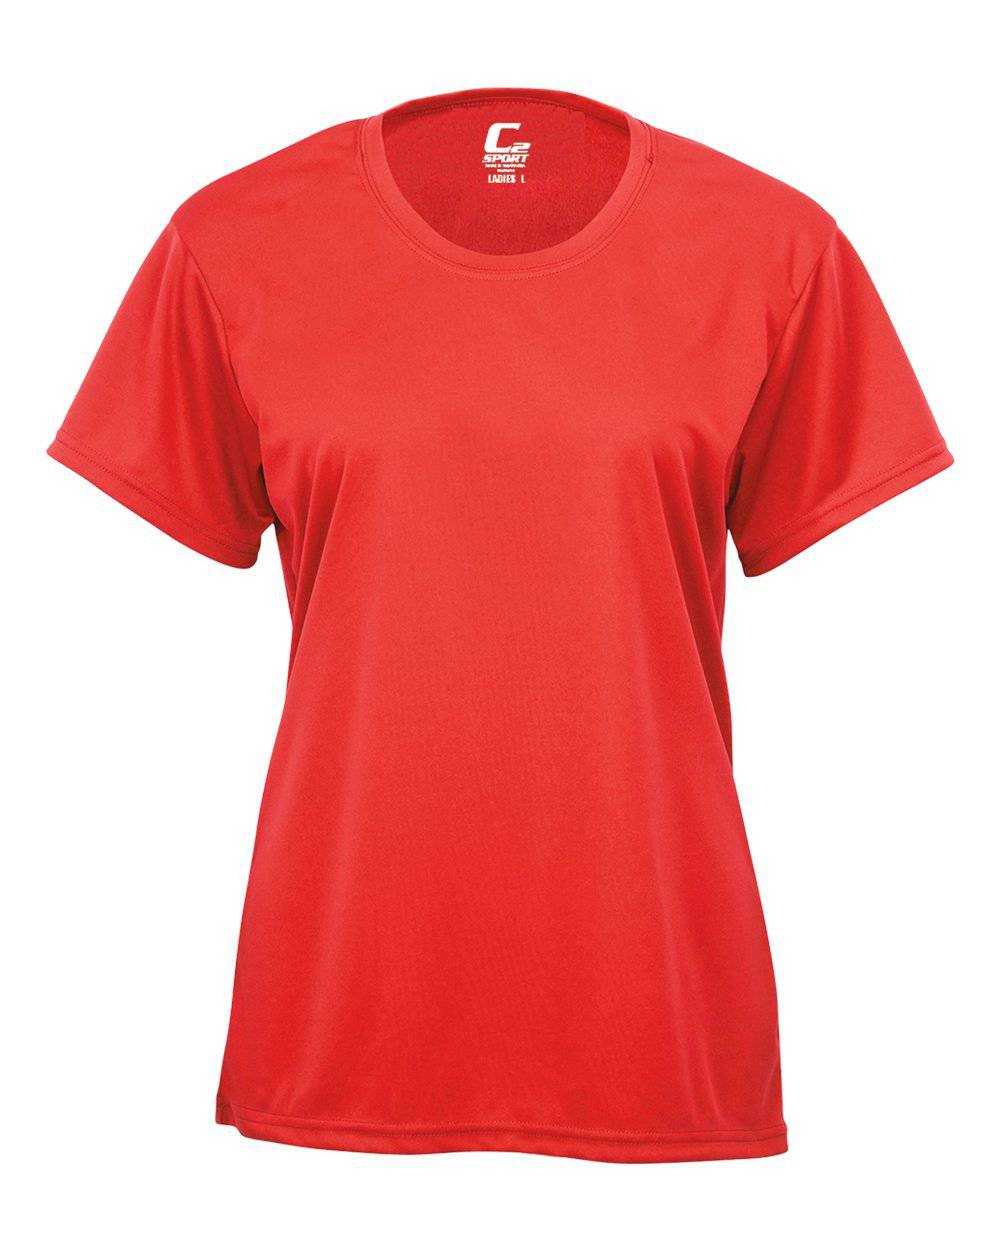 C2 Sport 5600 Ladies Tee - Hot Coral - HIT a Double - 1